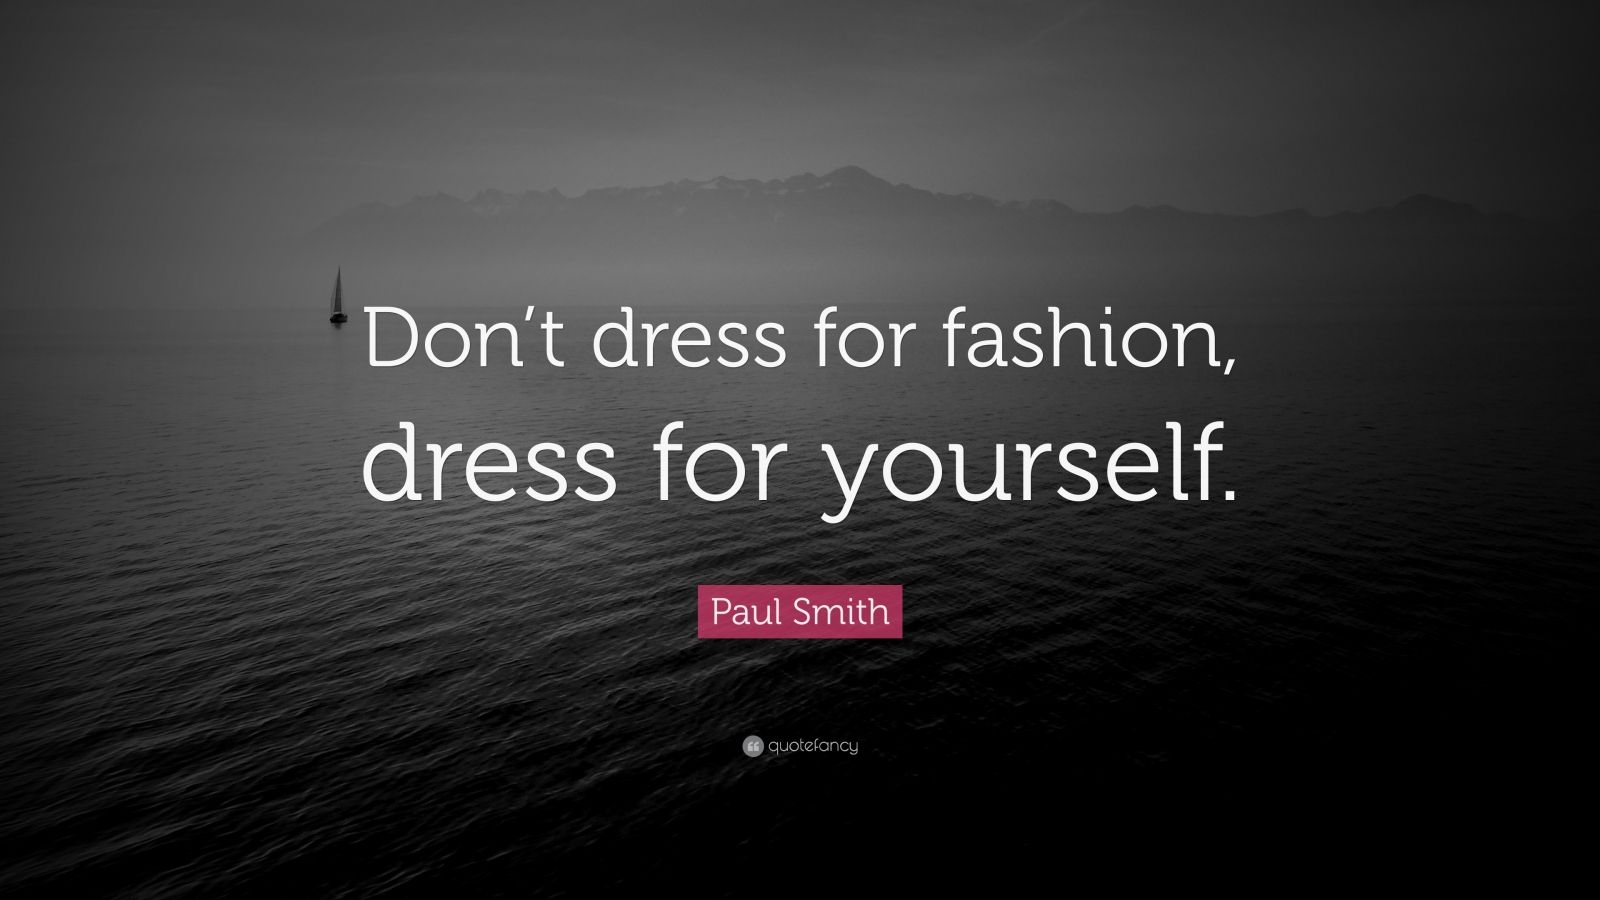 fashion style quote to remember - StyleFrizz | Photo Gallery